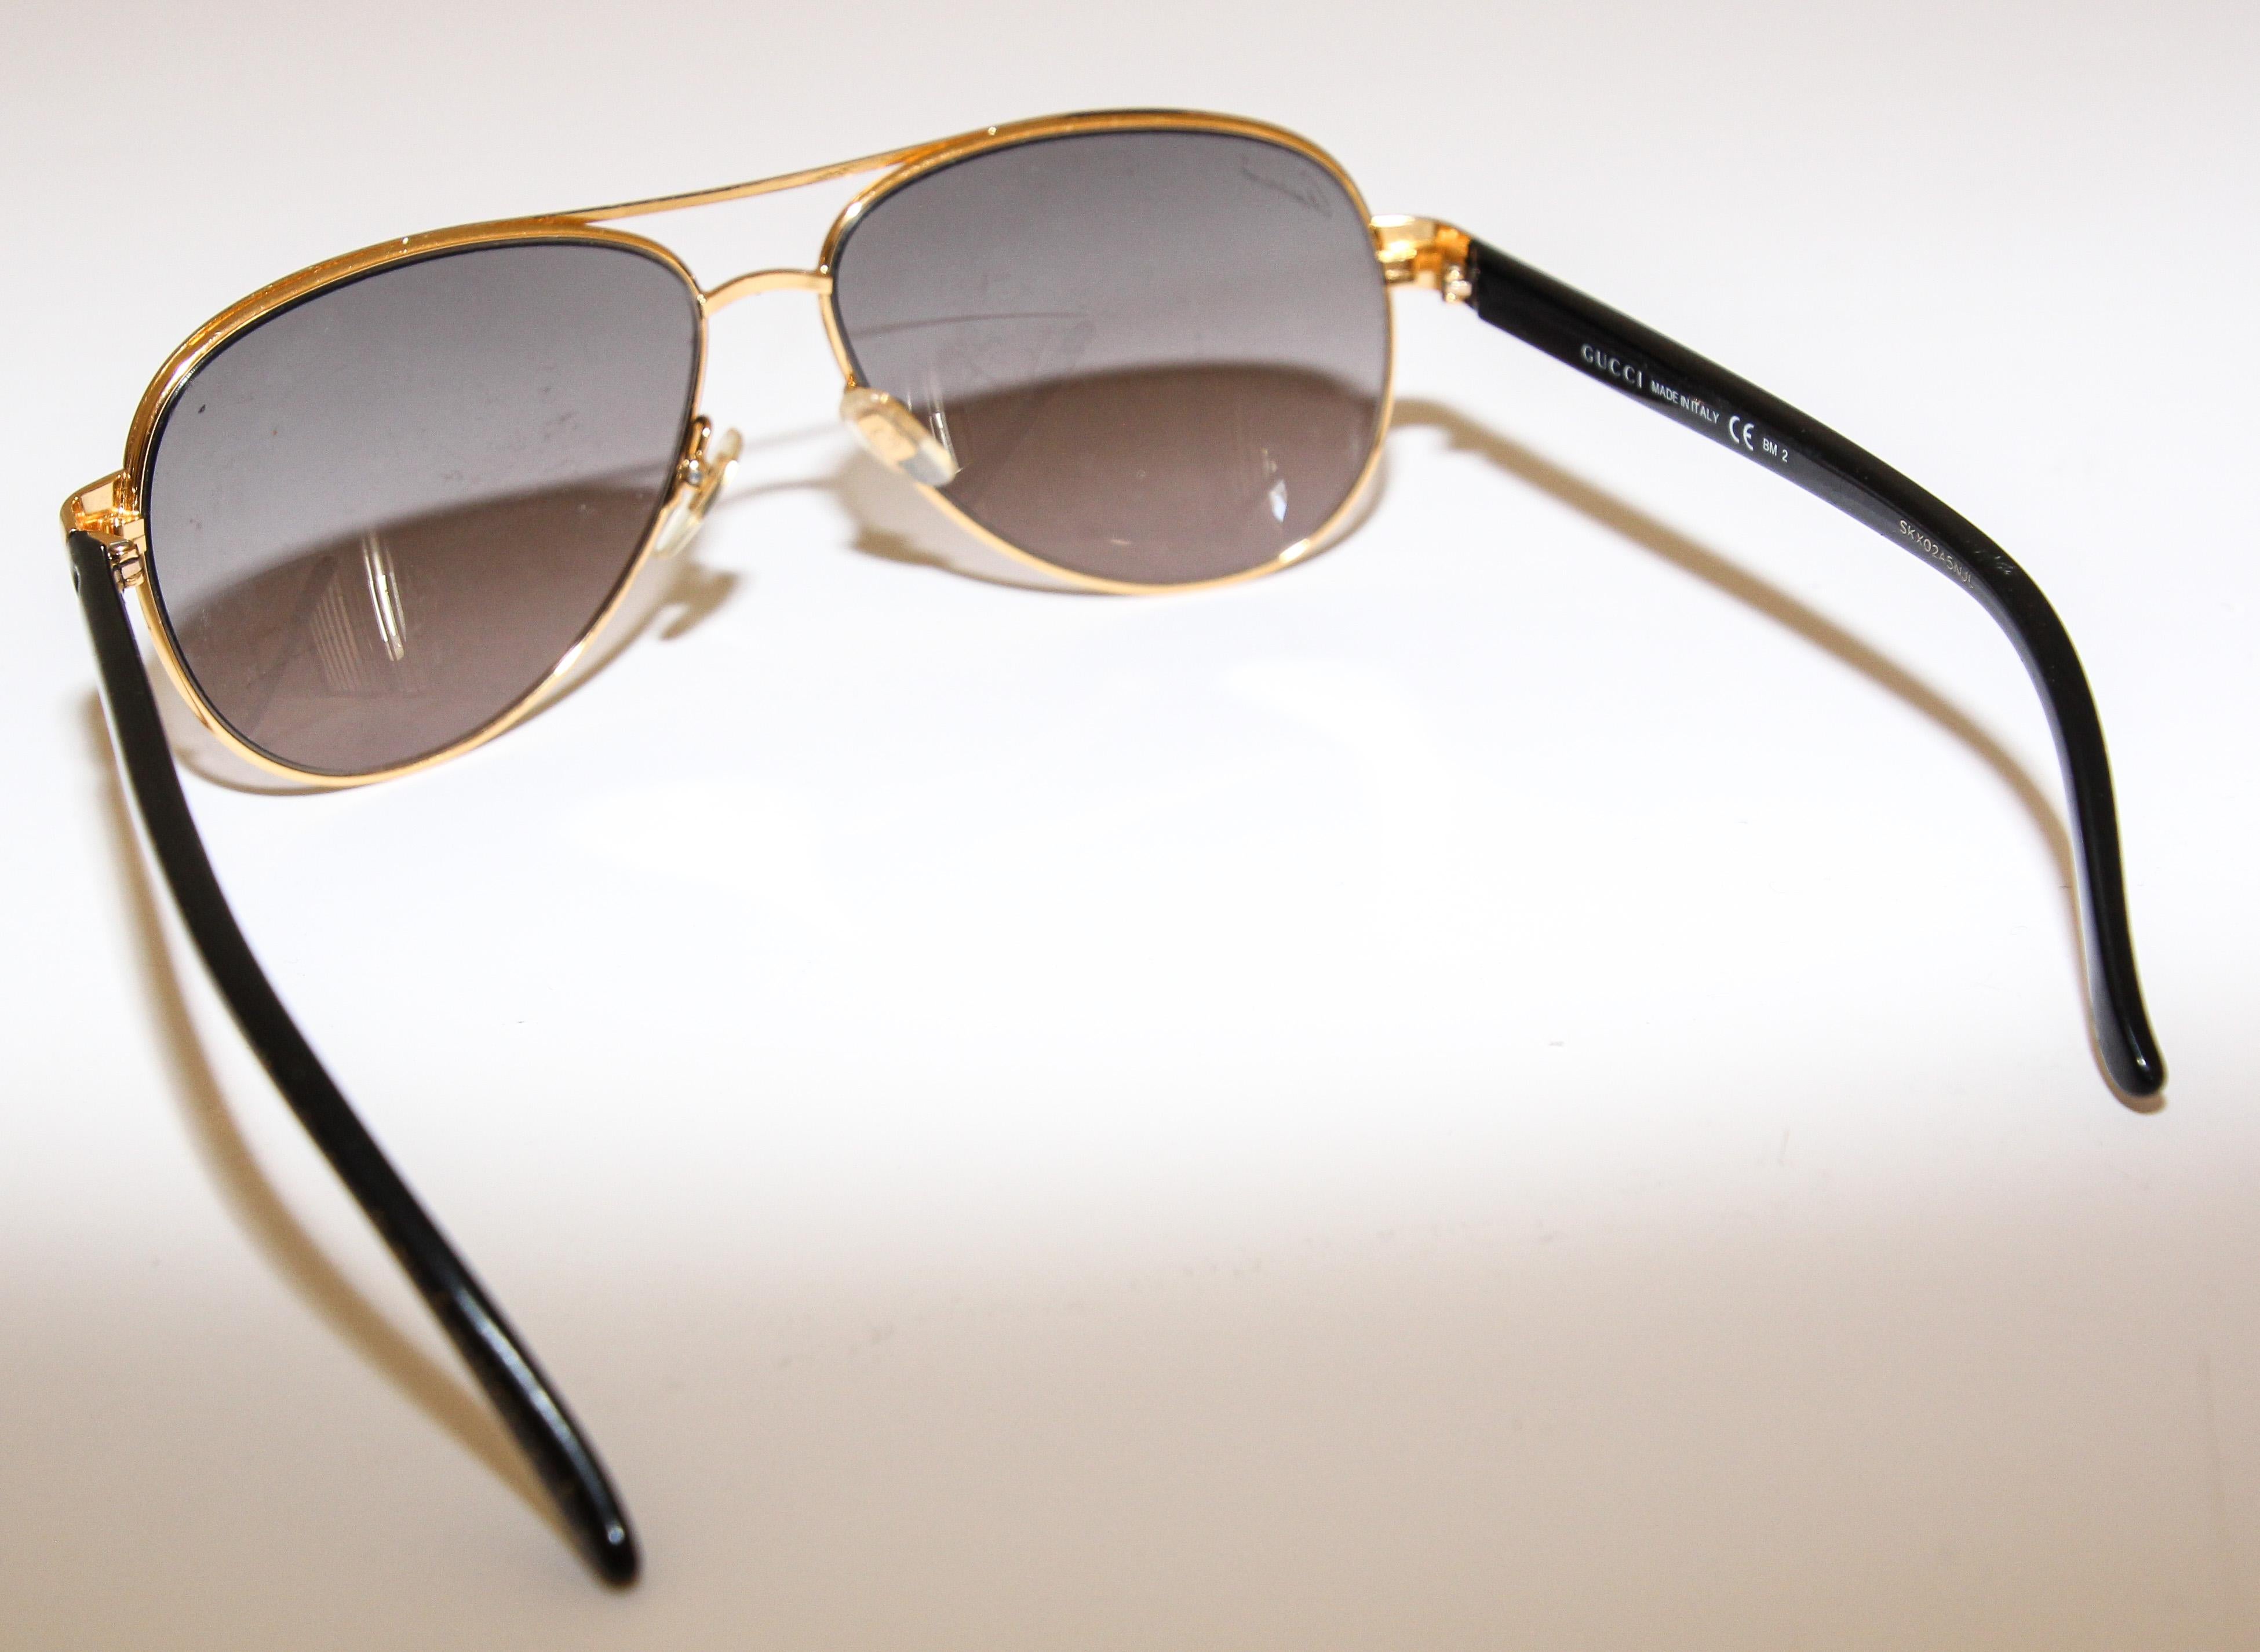 Vintage Gucci Aviator Sunglasses 1990's Made in Italy In Good Condition For Sale In North Hollywood, CA